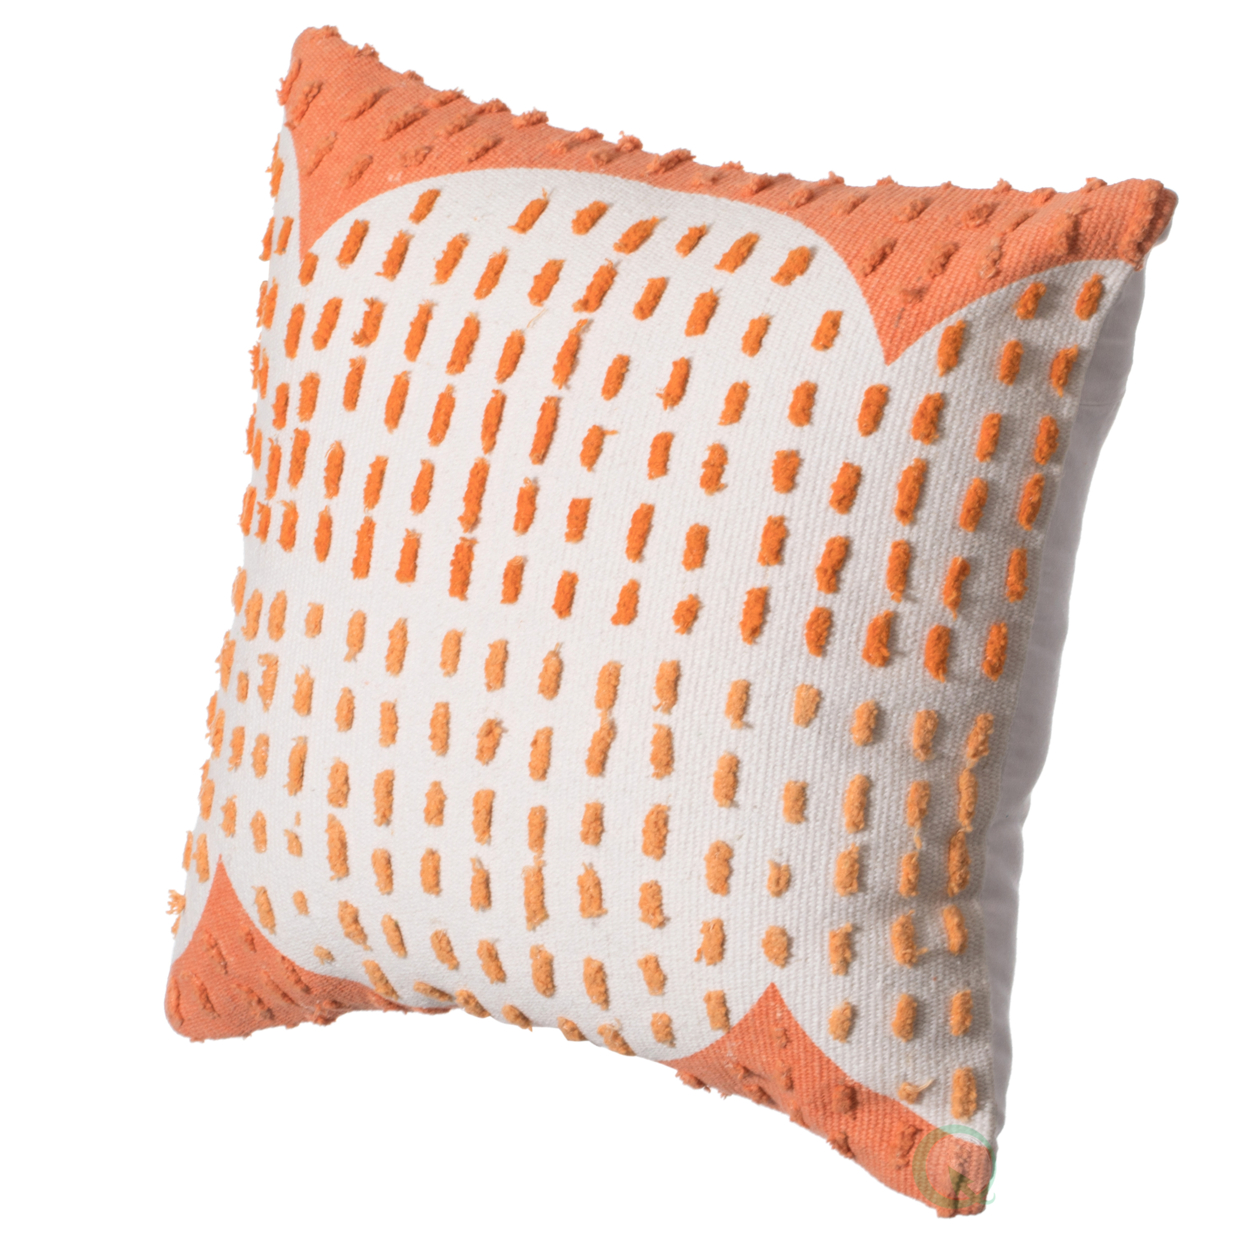 16" Handwoven Cotton Throw Pillow Cover with Ribbed Line Dots and Wave Border - coral with cushion